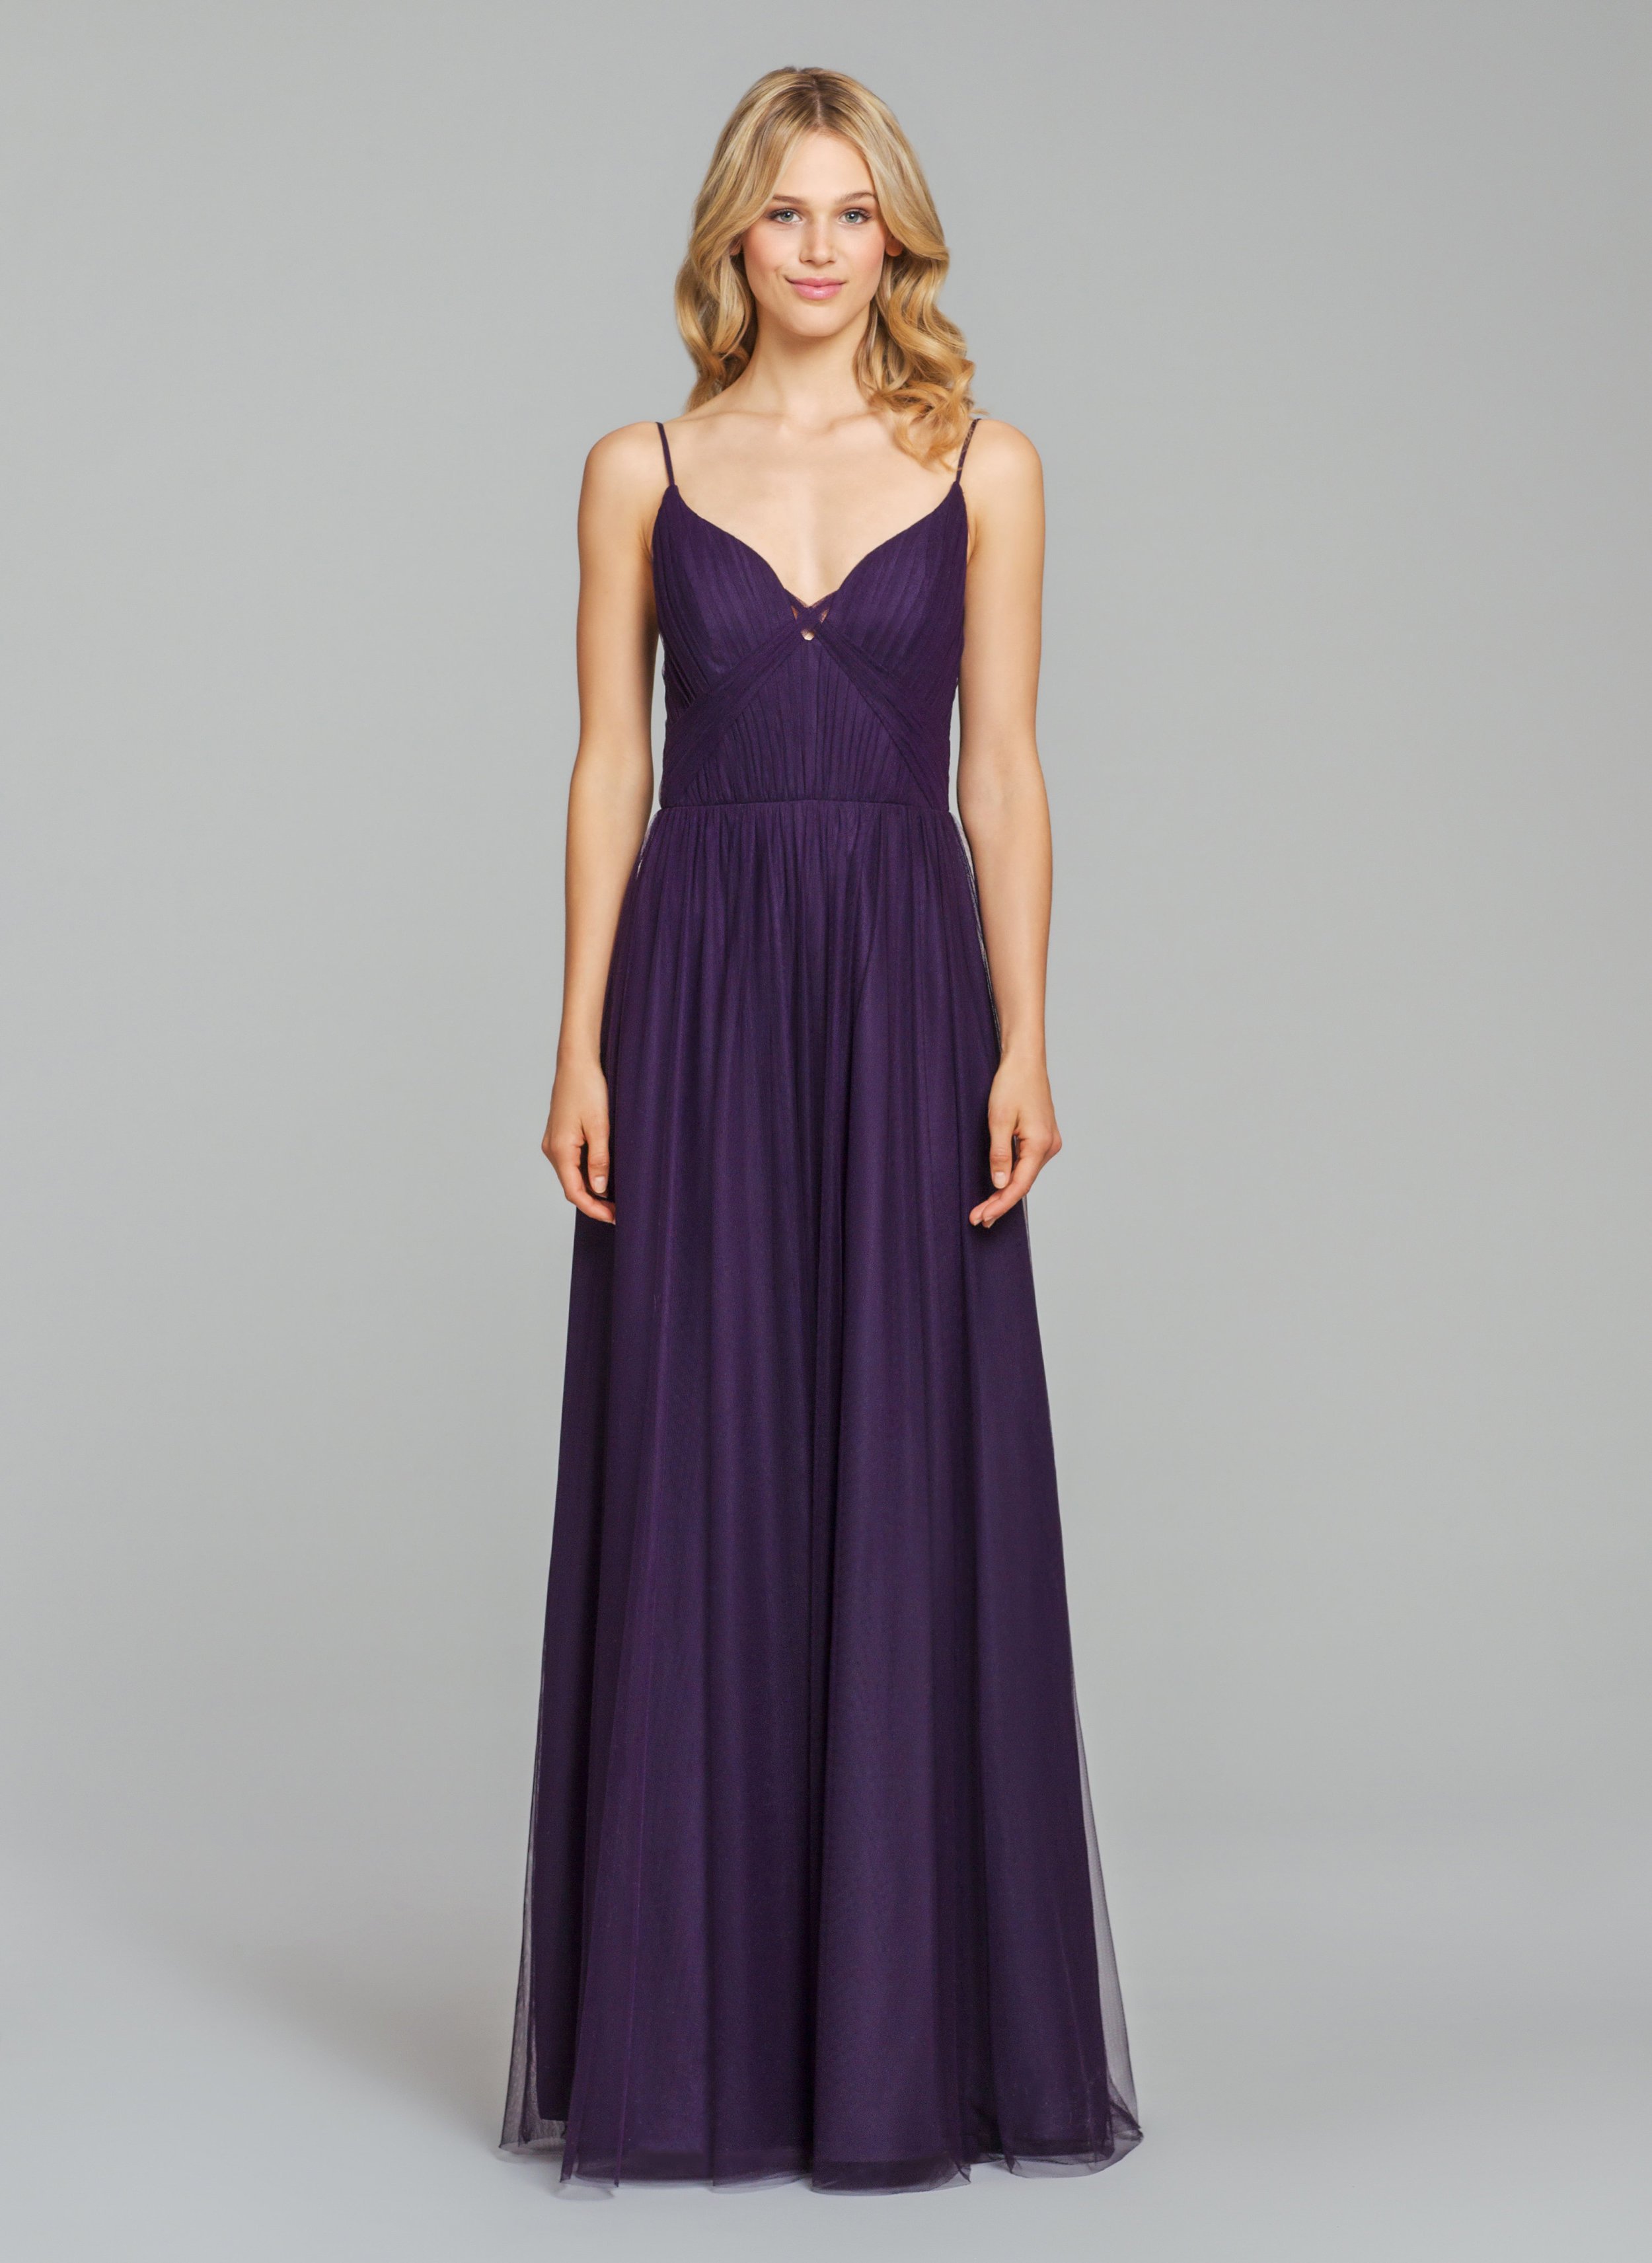 hayley-paige-occasions-bridesmaids-fall-2018-style-5859.jpg